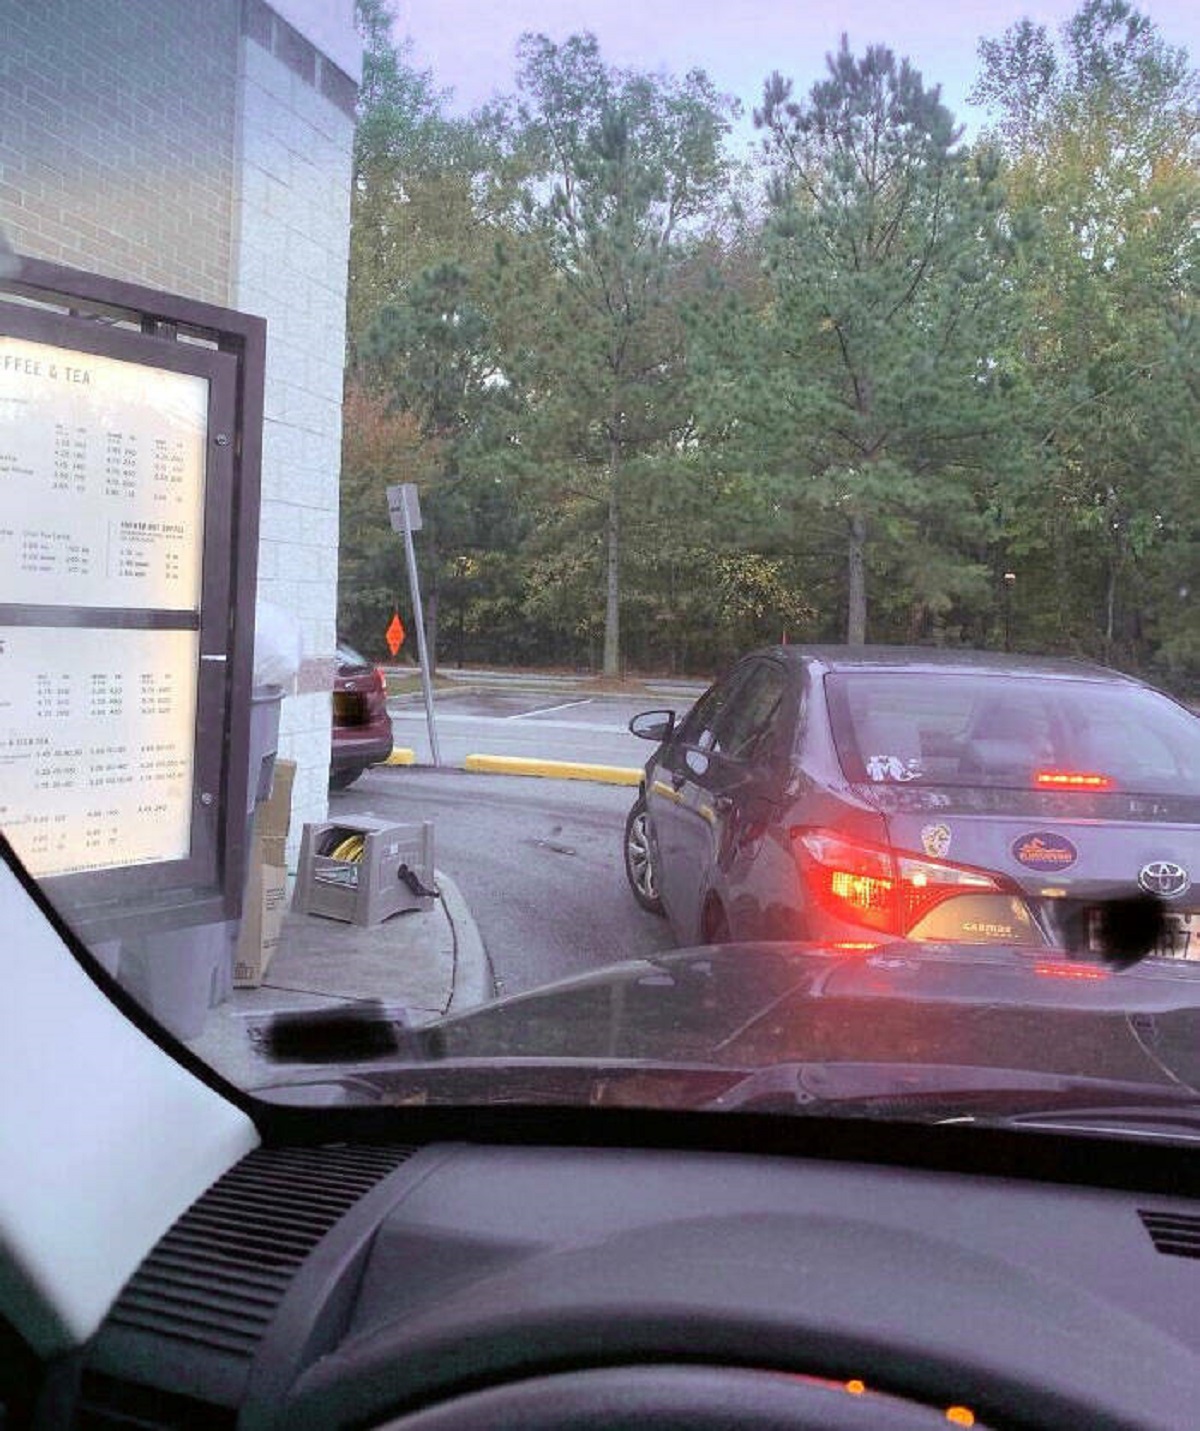 "When The Person In Front Of You In A Drive-Through Line Refuses To Move Up A Few Feet So You Can Order"